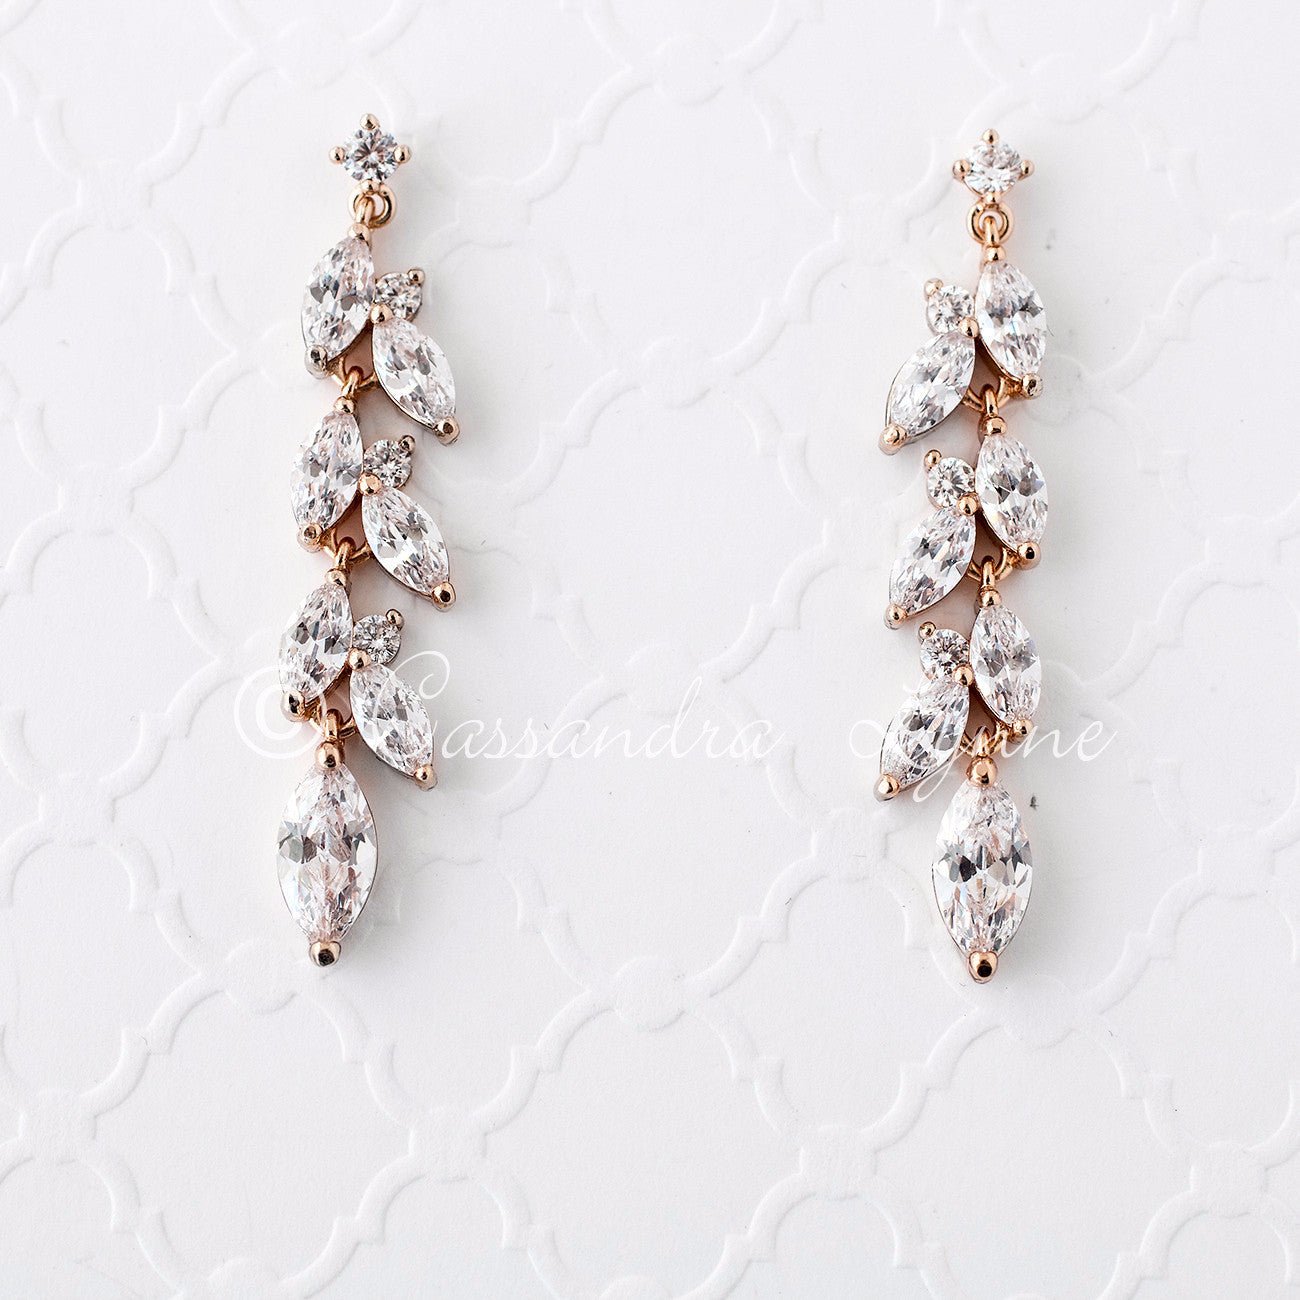 CZ Wedding Earrings with a Marquise Vine Design - Cassandra Lynne